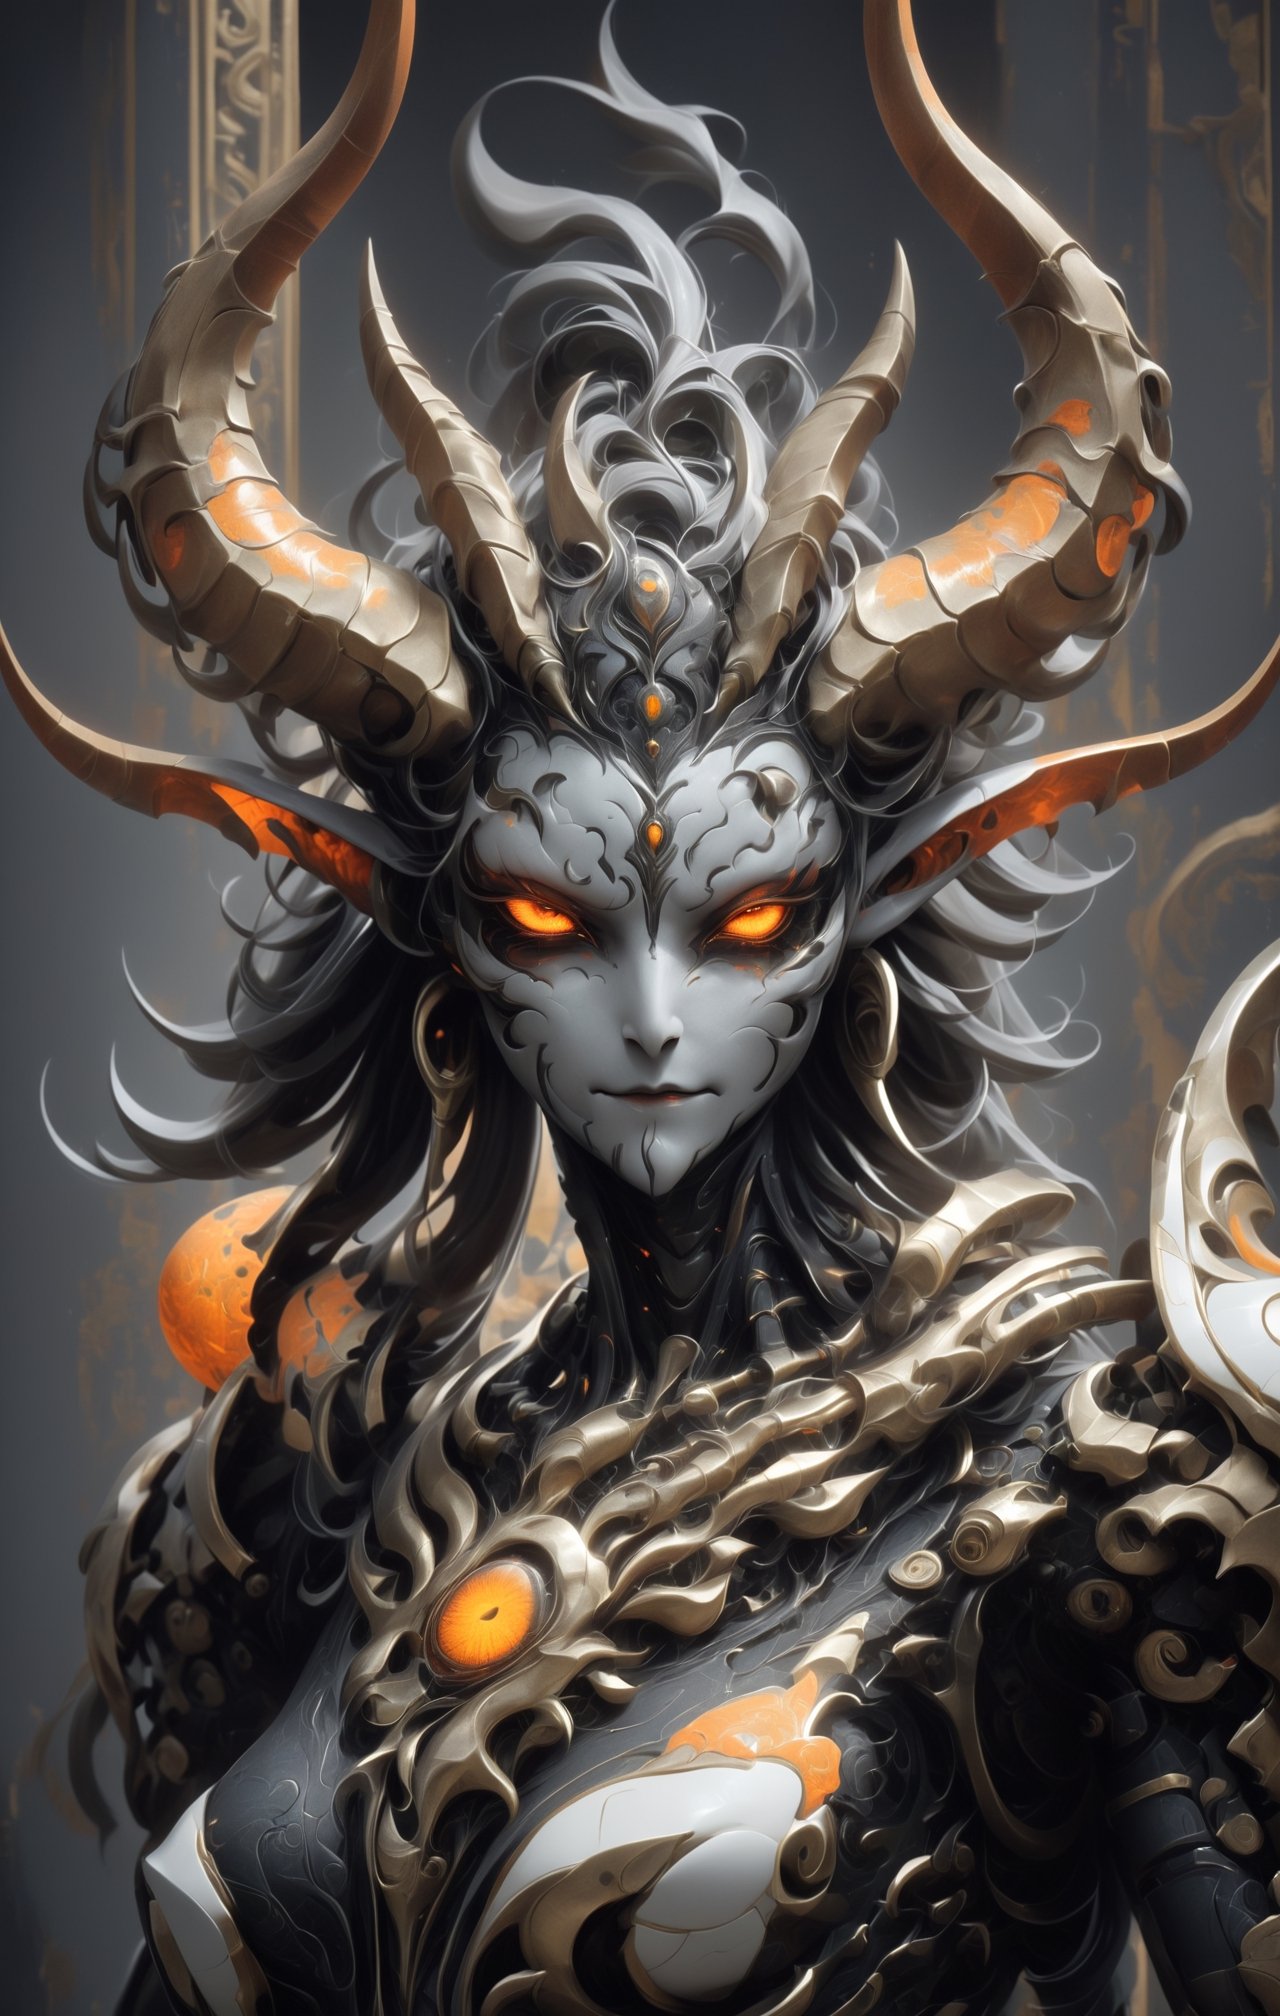 Create image of a symmetrical, fantastical being with an intricate design, blending organic and ornamental elements. The creature features ram-like, spiraling horns that are thick at the base and taper towards the tips. Between the horns lies a decorative, mandala-like pattern in light tones, mimicking the outline of a third eye. The being's face is humanoid but otherworldly, pale with sharp, darkened eye sockets that house glowing, orange eyes. Its nose is subtle, and its mouth forms a small, grimacing smile. Directly below, similar ornamental patterns repeat, with glowing orange accents resembling eyes.

The entity's shoulders and torso seem to form a dark, armor-like carapace, adorned with similar organic decorations and faint hints of reflective, metallic surfaces, suggesting hard, chitinous material. The color palette is dominated by dark greys, browns, and blacks, with strategic use of an orange glow to emphasize eyes and patterns, giving the impression of an inner fire. The background blends seamlessly into the figure, echoing the dark and mysterious atmosphere with hints of similar patterns and shapes, suggesting an environment that is as decorated and alive as the being itself.

The artwork has a baroque feel, rich in detail and ornamentation, with a balance between the fierce and the delicate. The proportions emphasize the creature's majestic presence, with the spiraling horns and decorative patterns adding to its height and the imposing quality of its visage., 3D SINGLE TEXT,ruidg,robot,niji6